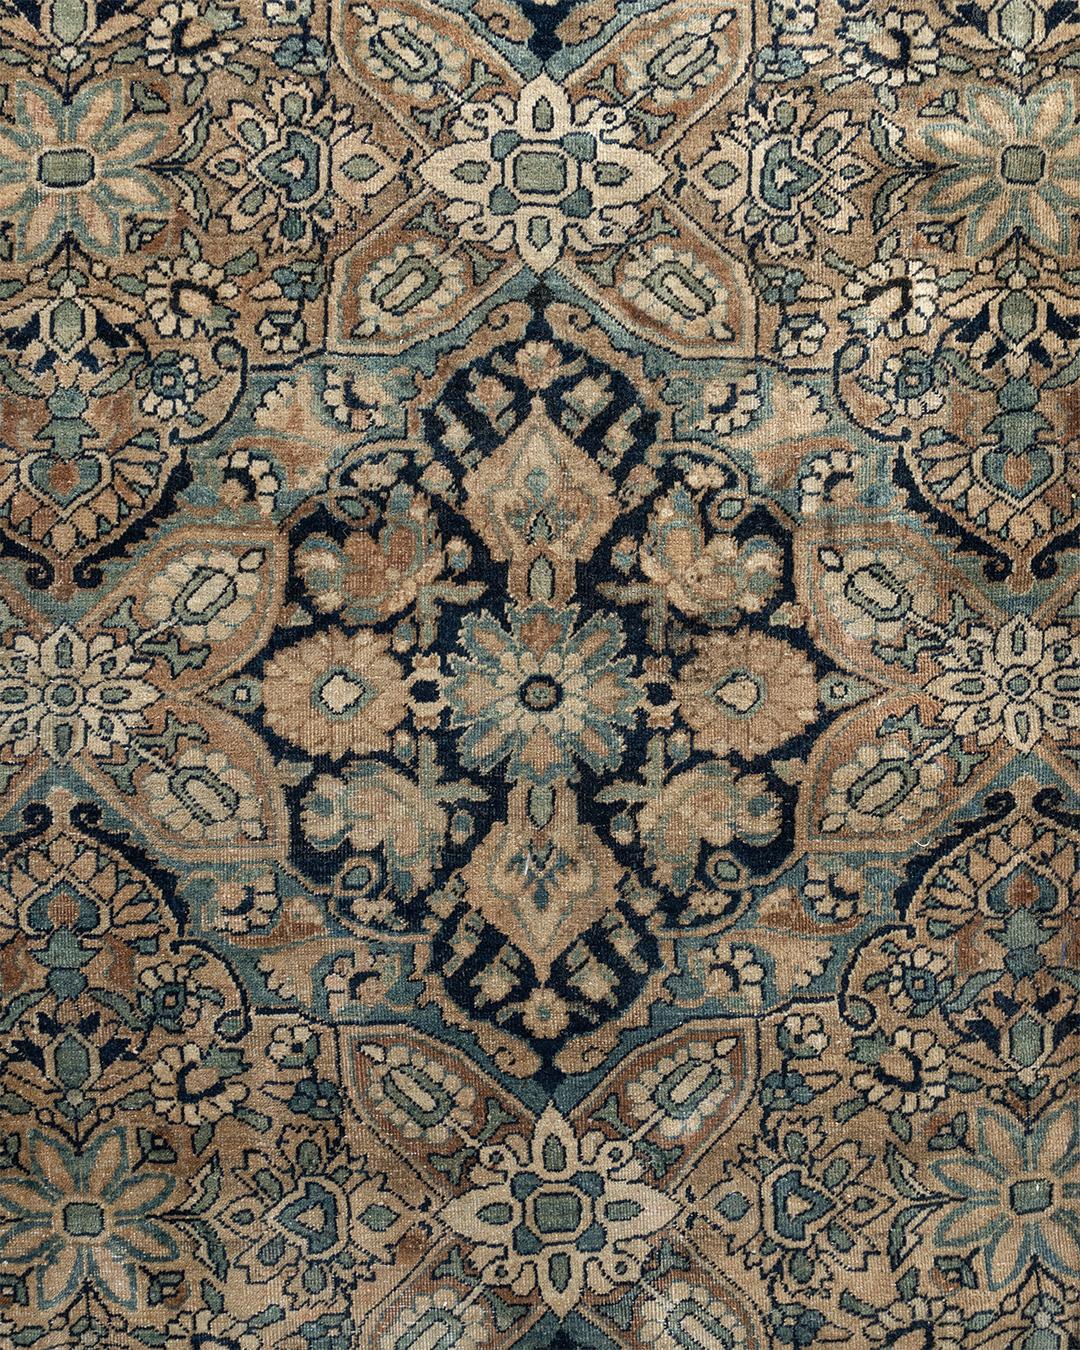 Antique Kirman rug, circa 1880, 13' x 20'. Kirmans of the late 19th century are thin fine rugs with most often overall repeat pattern. Here a subtly colored diagonal lozenge lattice encloses floral medallions. There is no distinct field color but